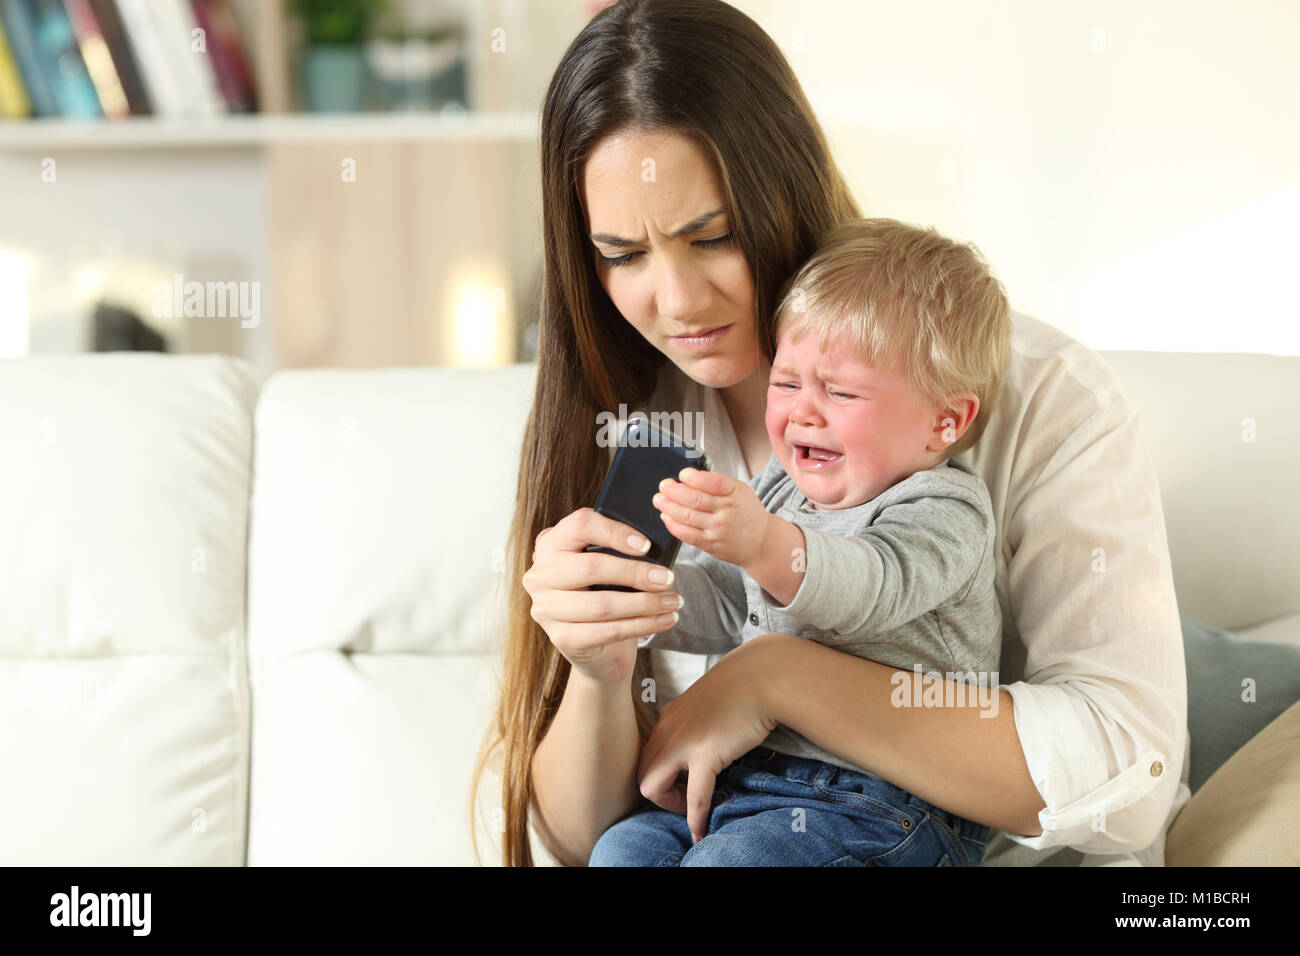 Baby having a tantrum and fighting with his mother for a smart phone sitting on a couch in the living room at home Stock Photo